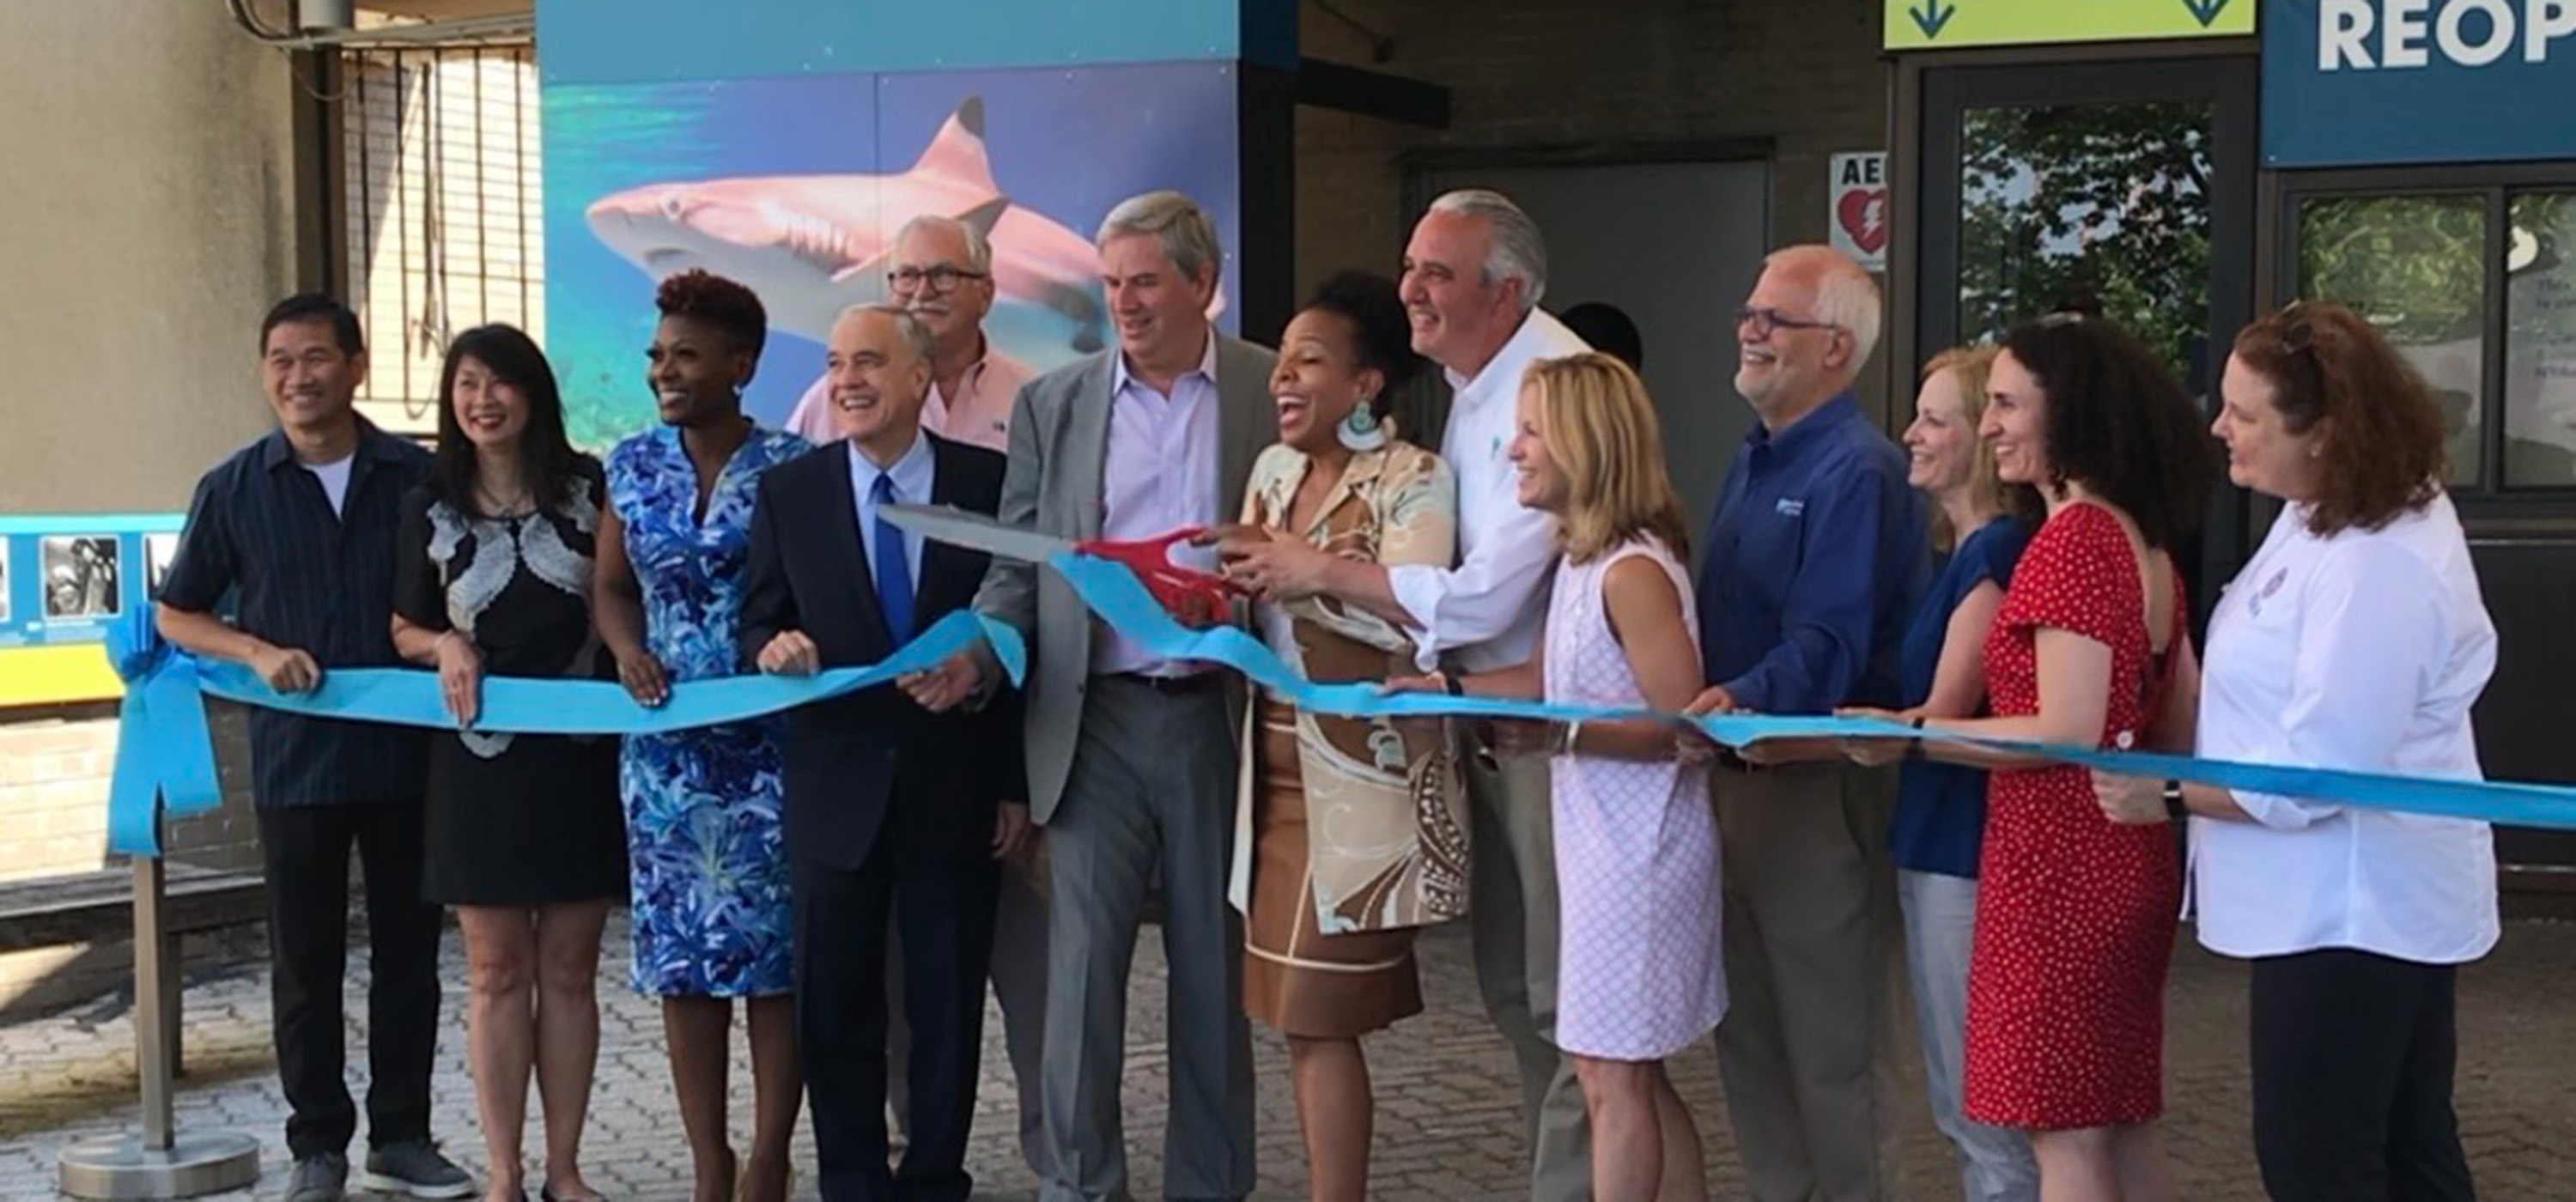 New York Aquarium Fully Reopen After Finishing Superstorm Sandy Repairs